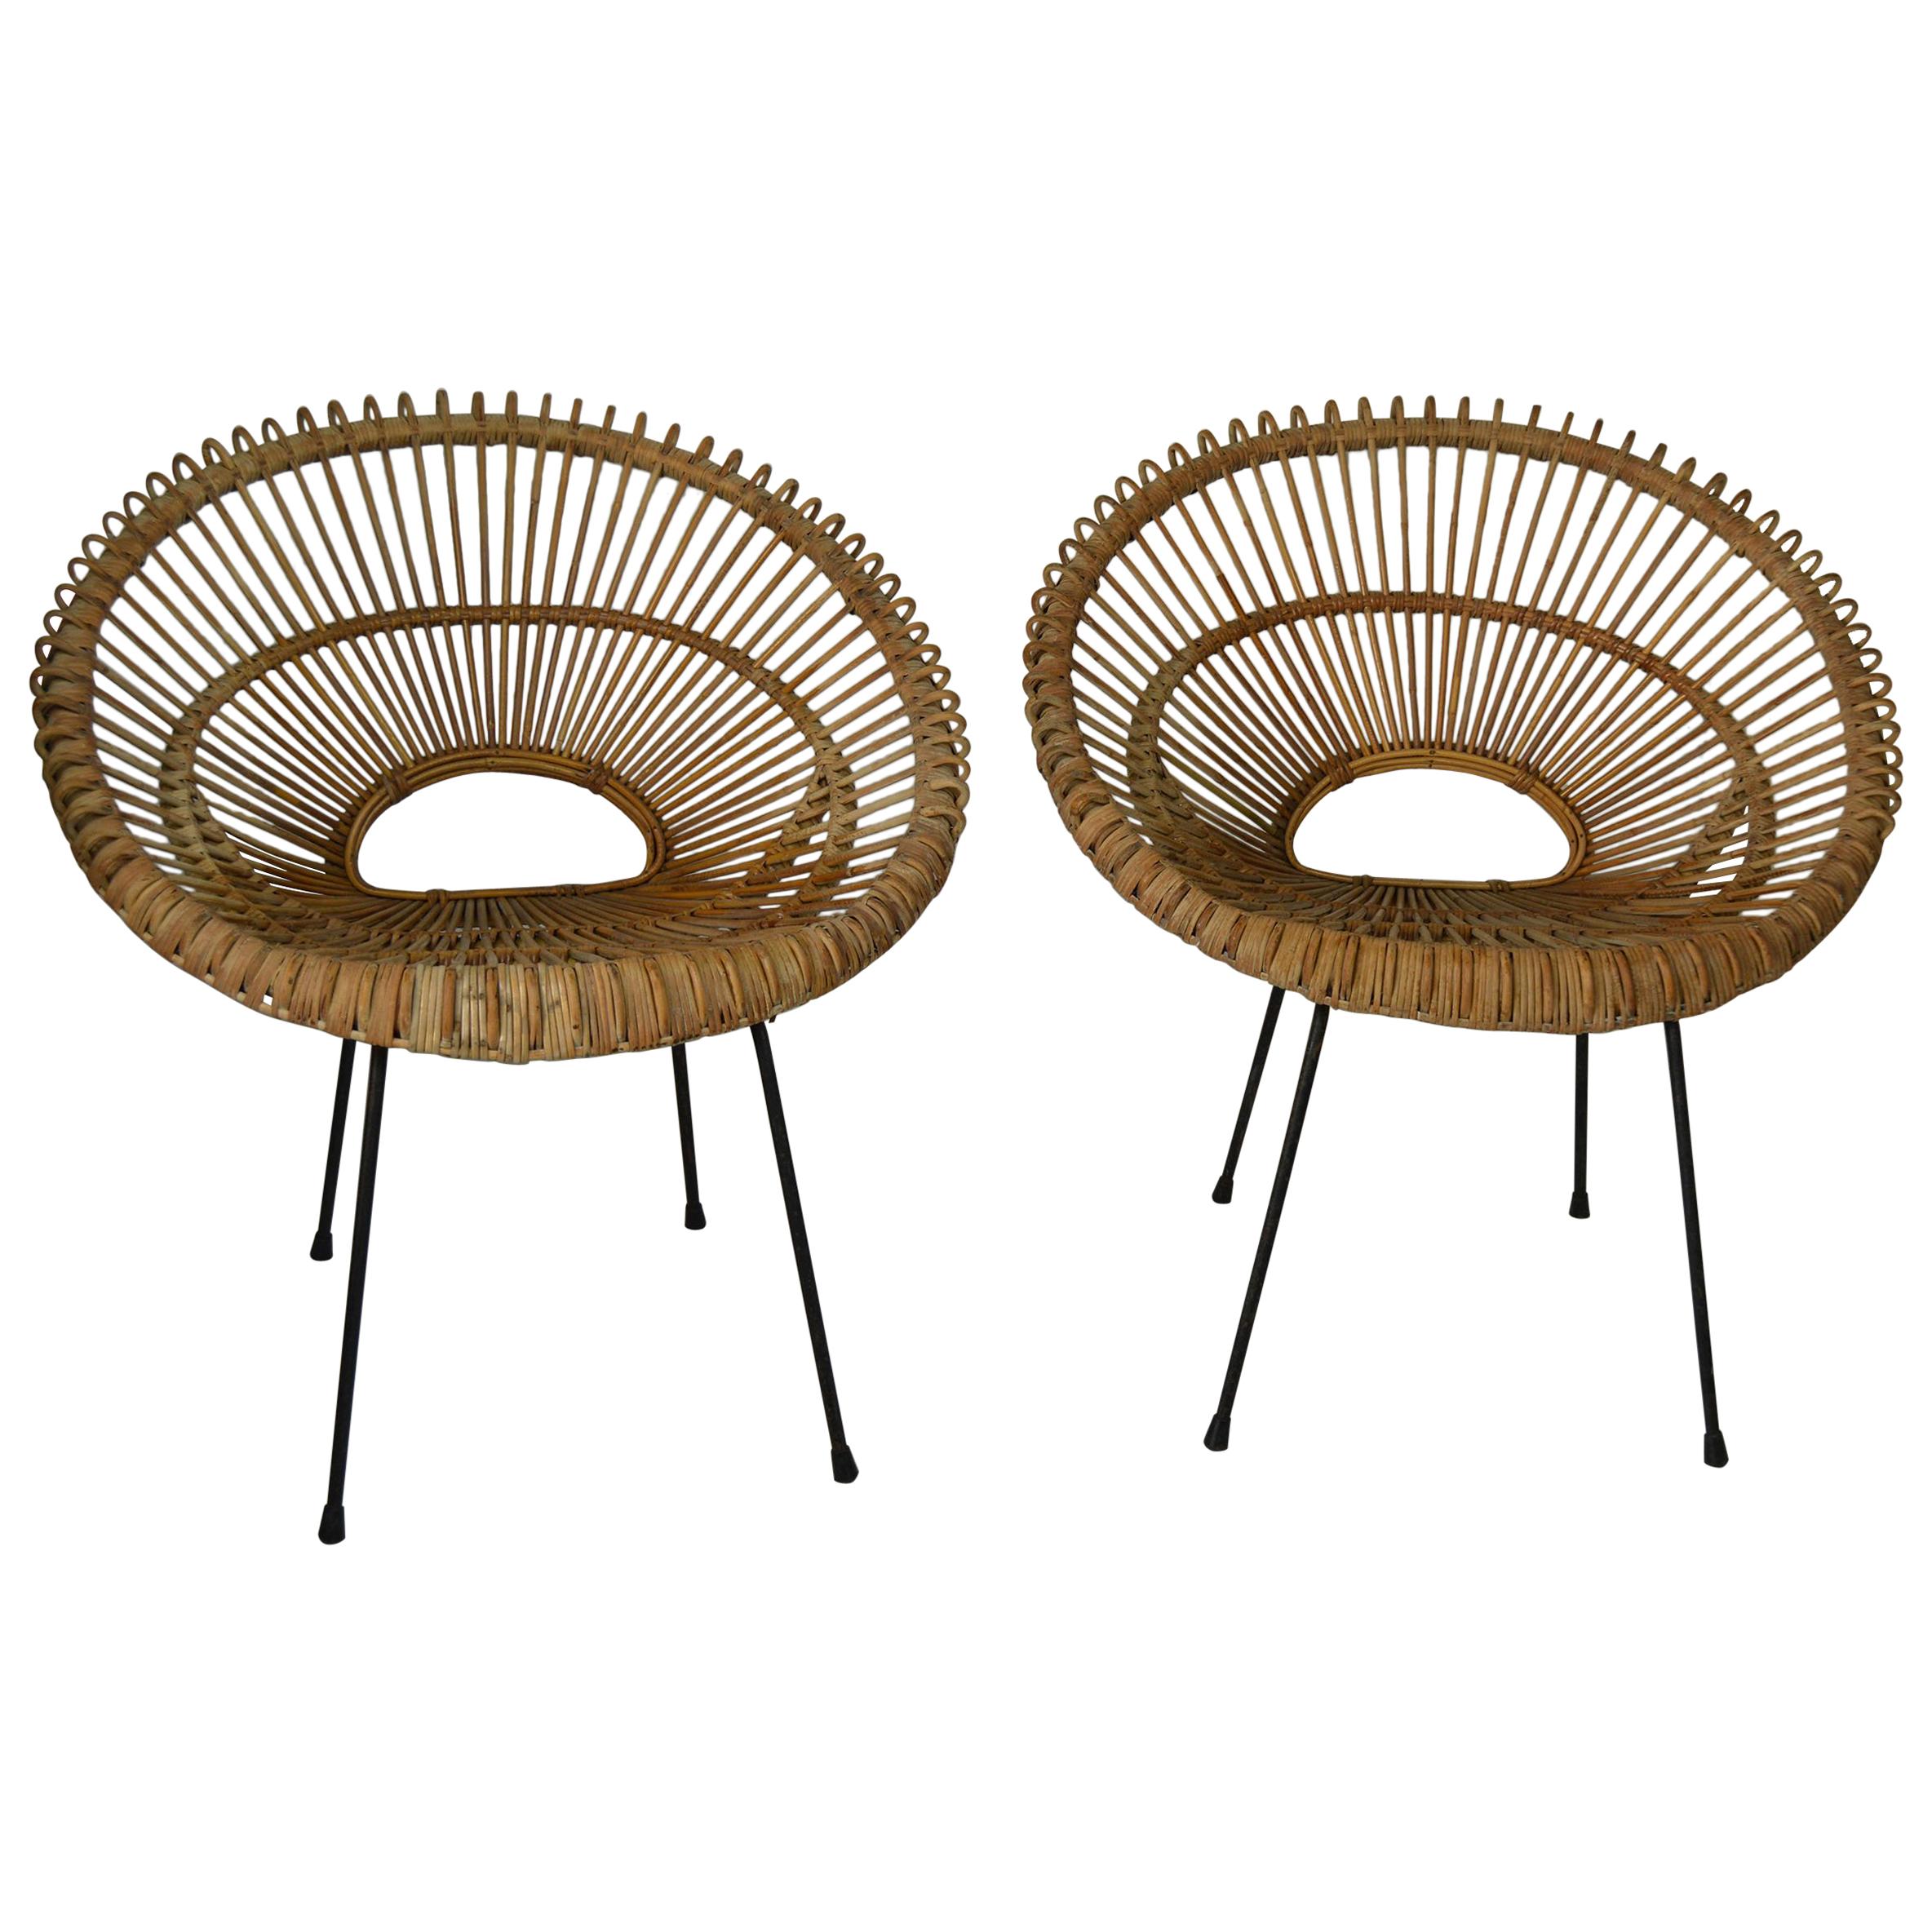 Pair of Midcentury Rattan Chairs in the Style of Franco Albini, Italian, 1950s